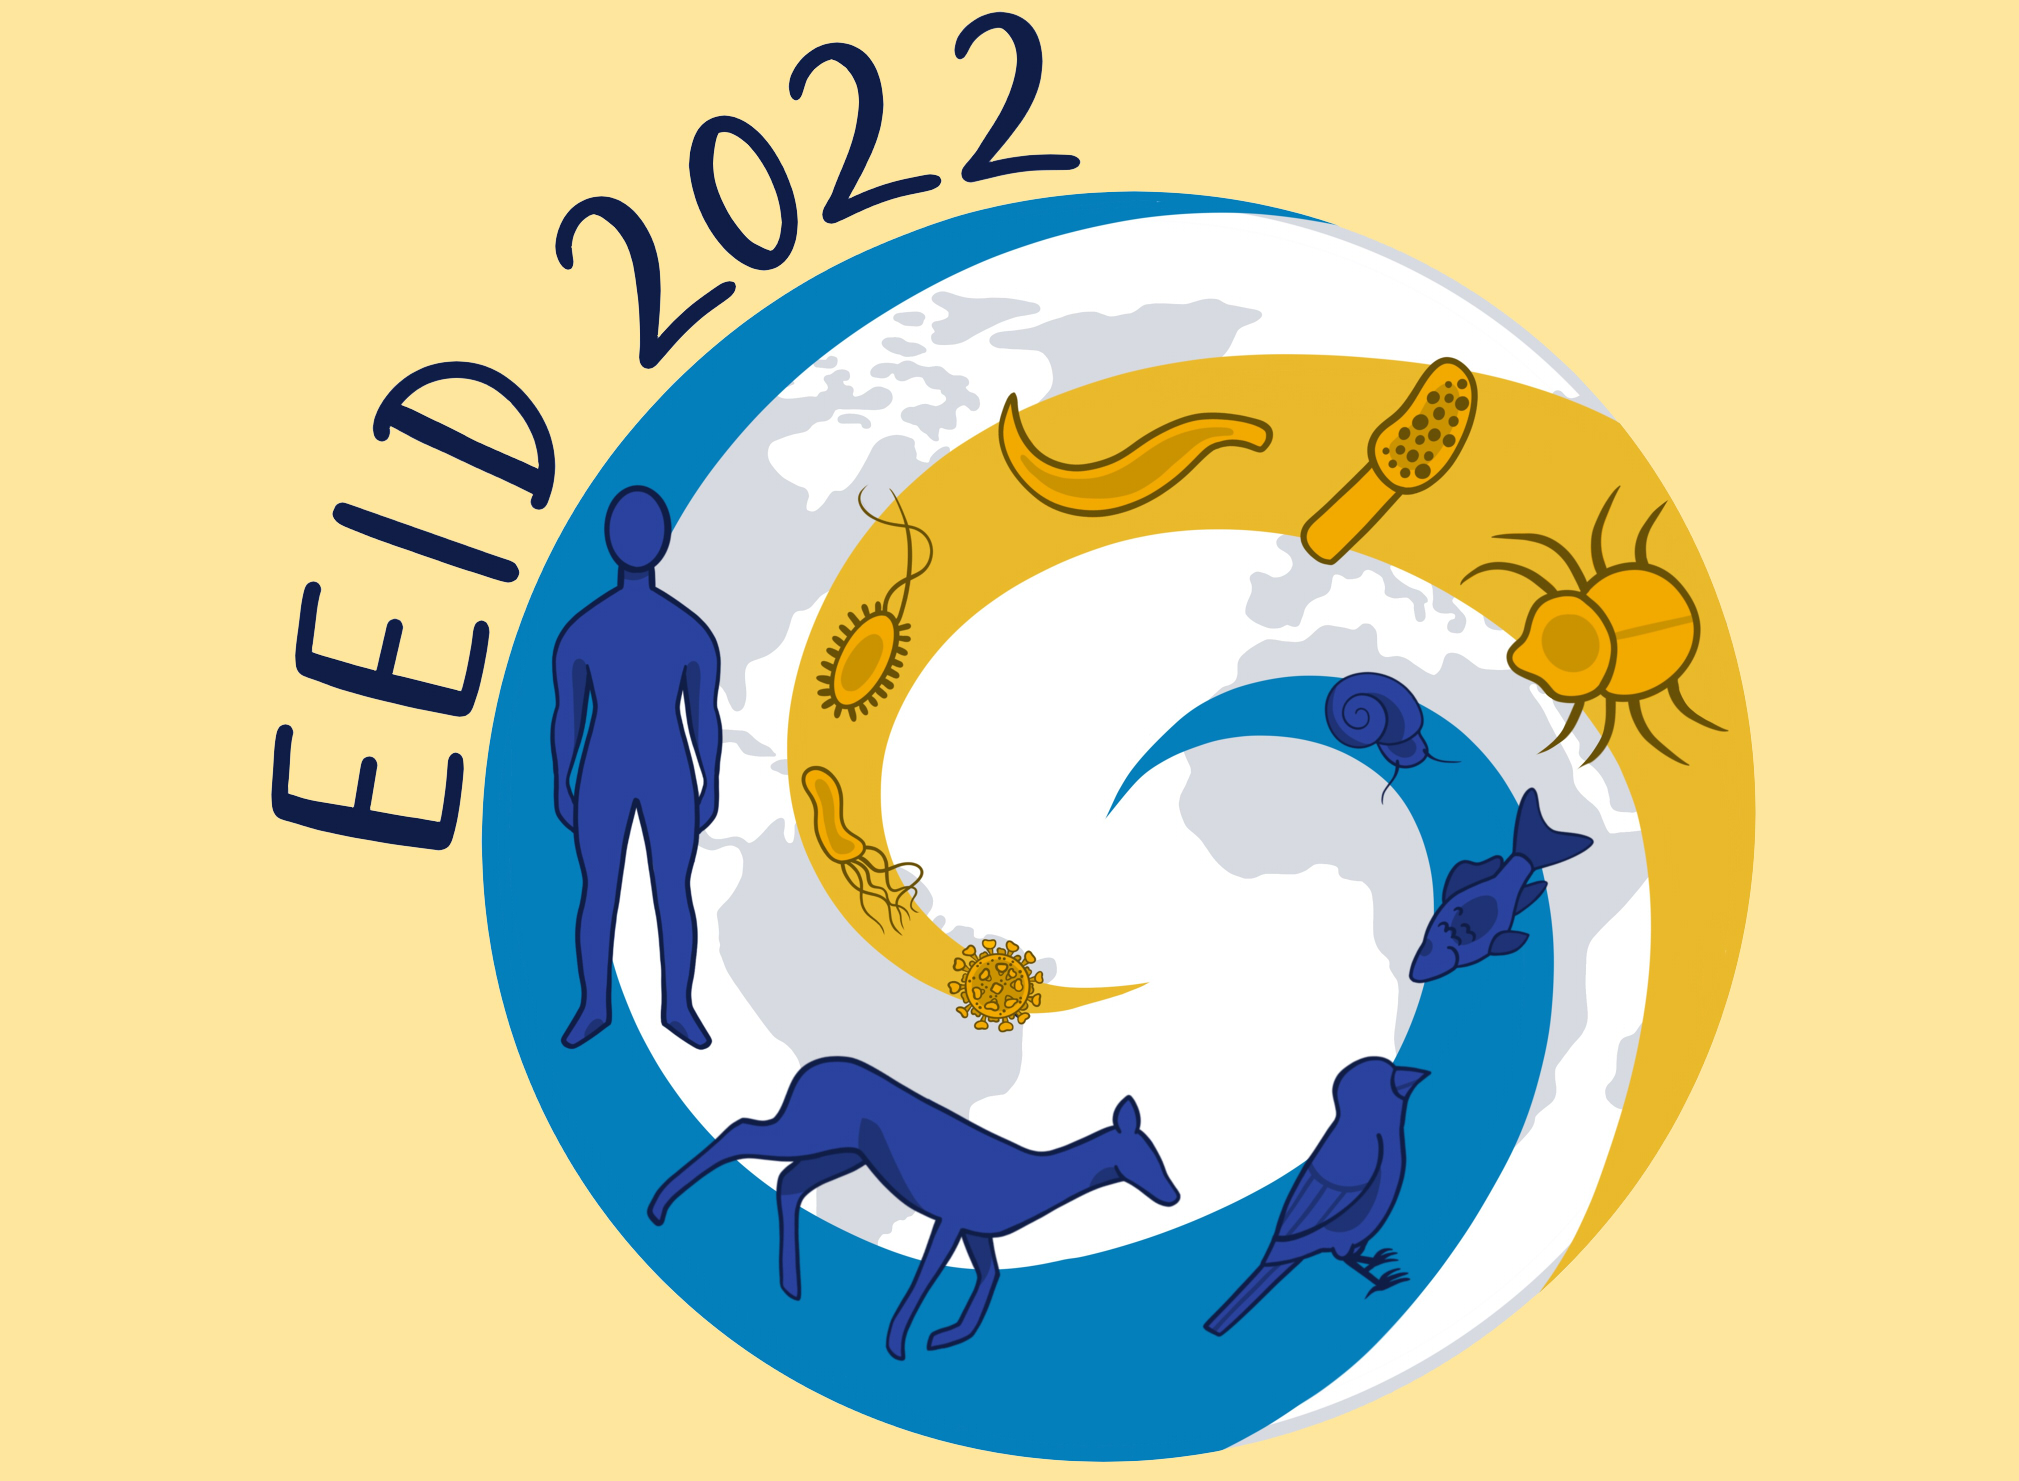 EIDD 2022 Conference Logo: A colorful spiral with animals and humans